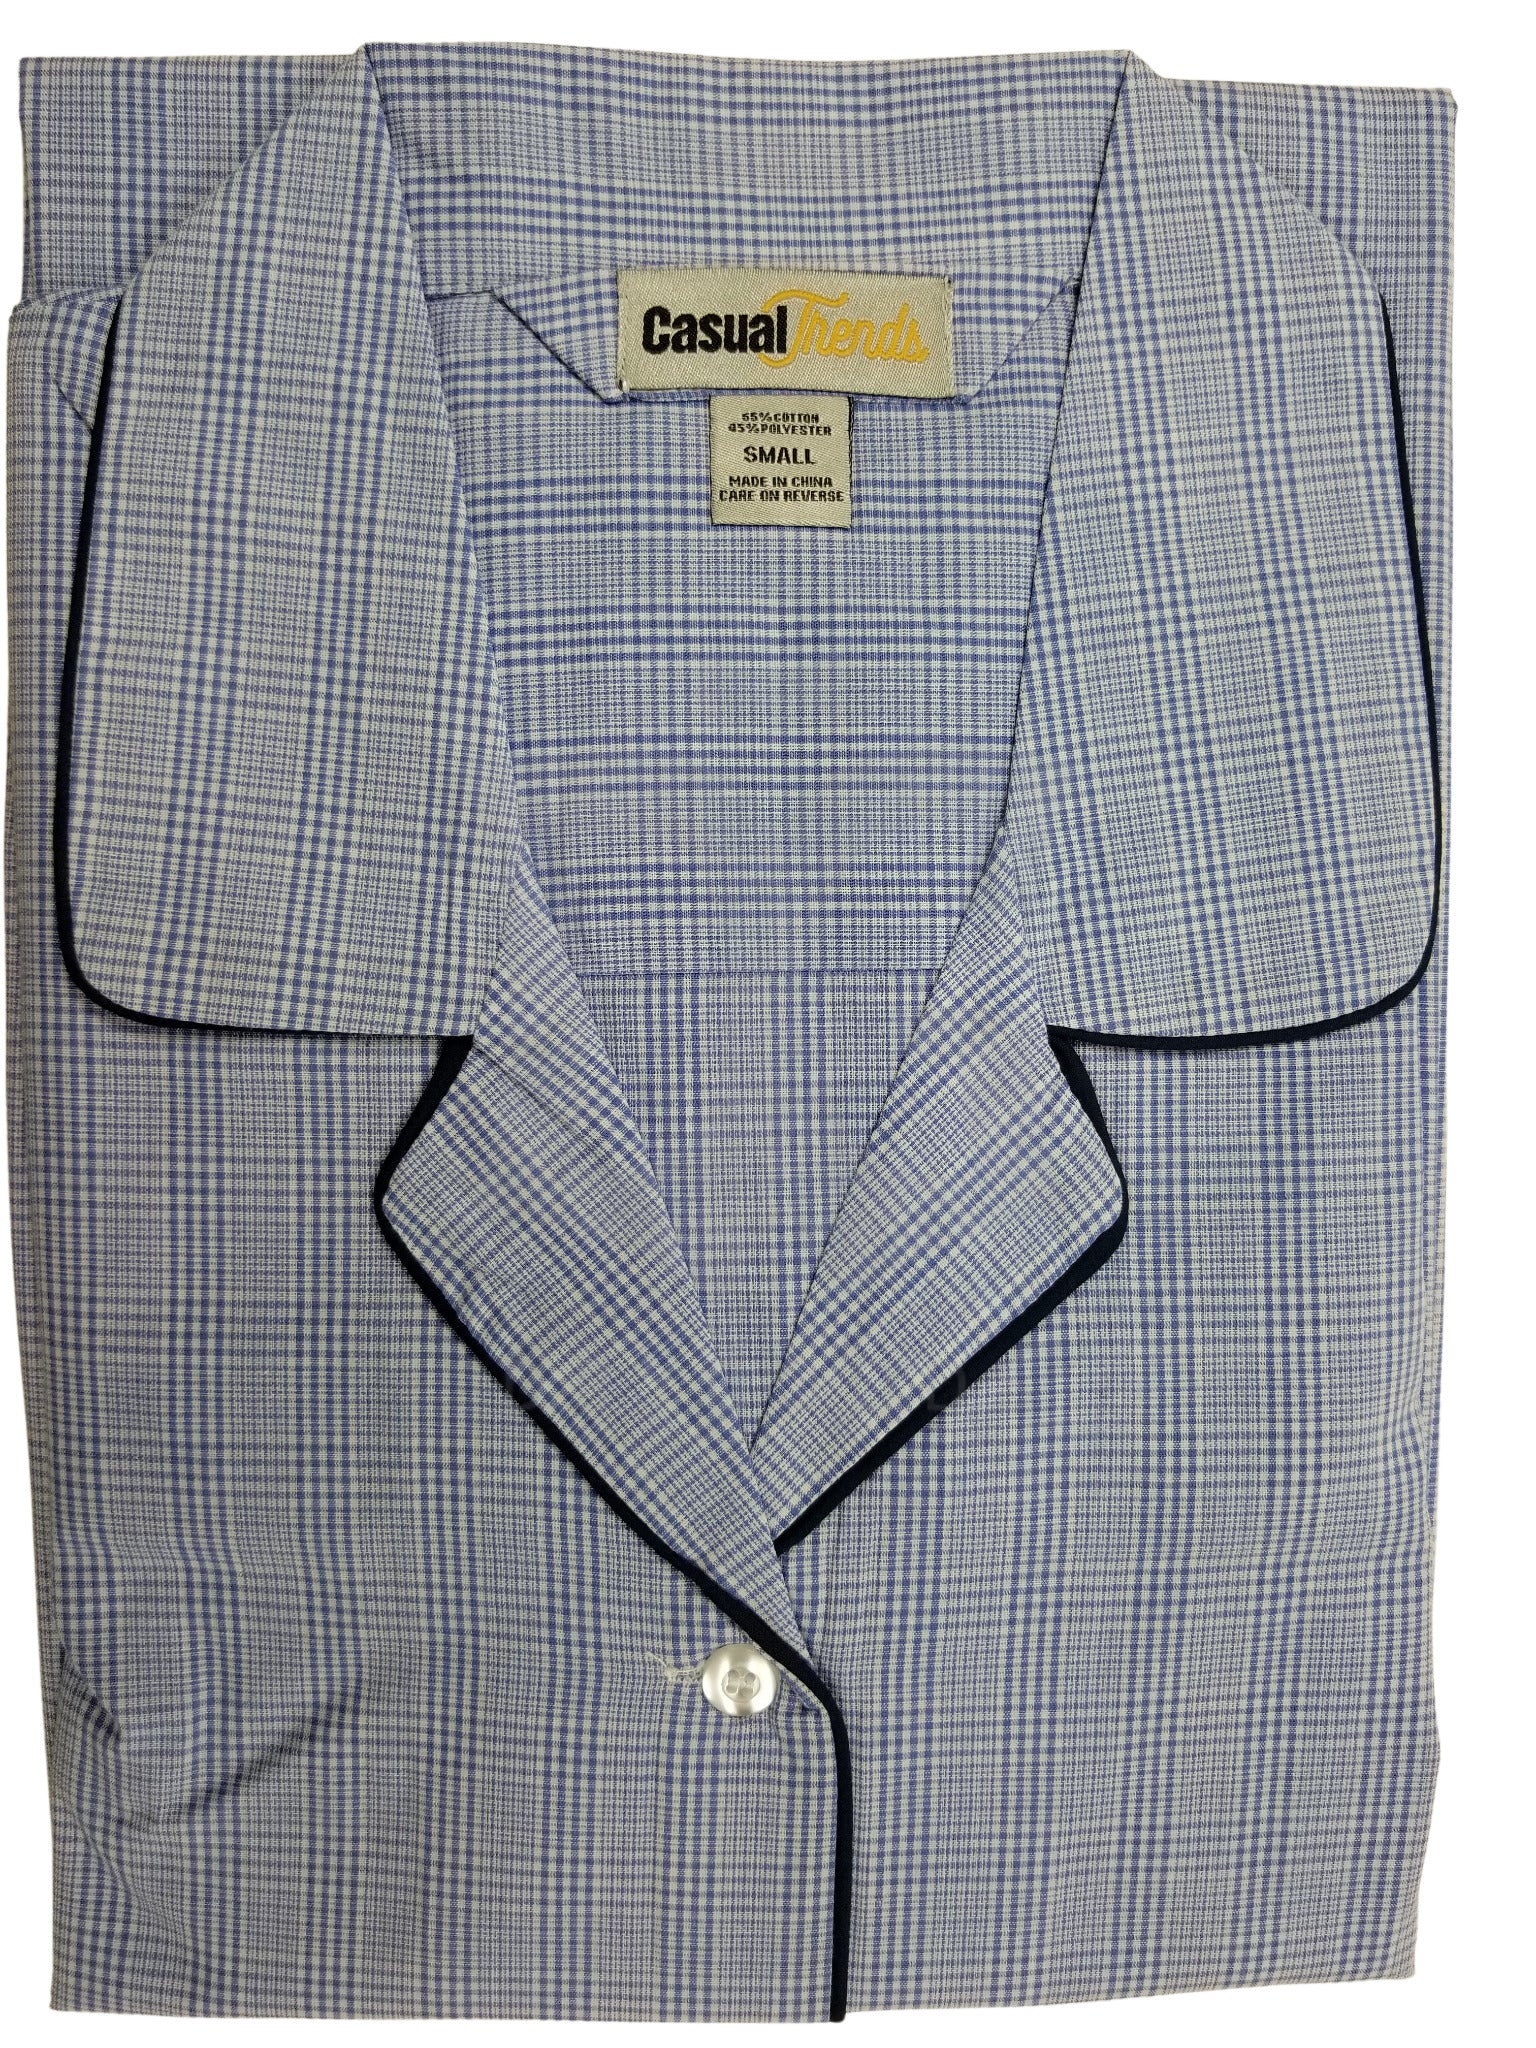 Casual Trends Mens Assorted Night Shirt